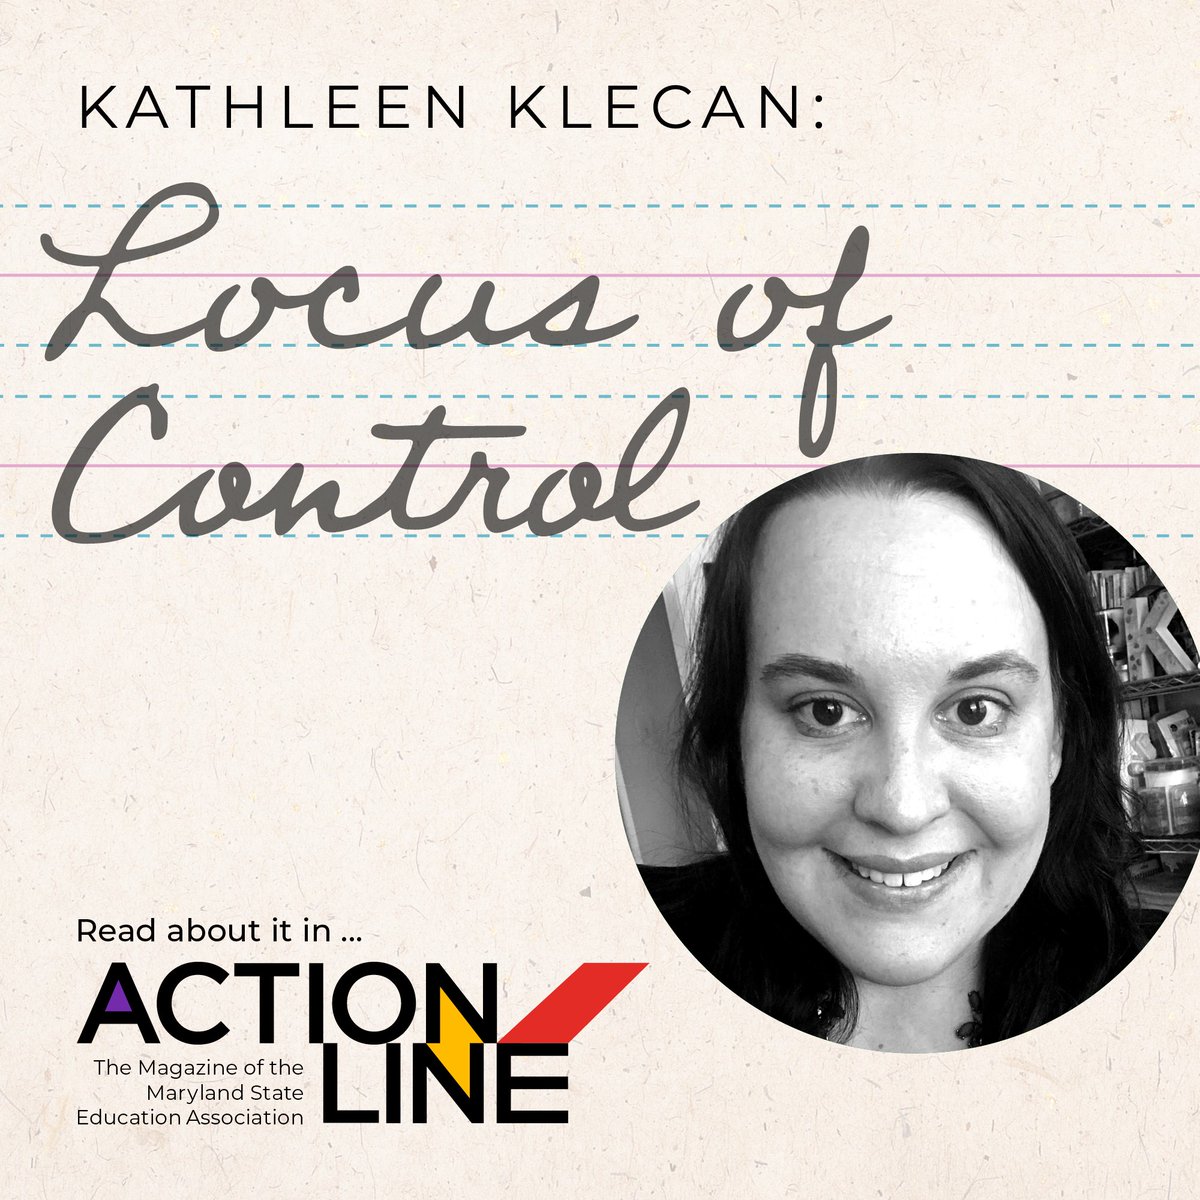 In this issue of ActionLine, Frederick County’s Katheleen Klecan, a former Maryland School Counselor of the Year, shares a best practice that can help your entire school community. Learn more about this in the latest issue of ActionLine: marylandeducators.org/breakthroughs-….